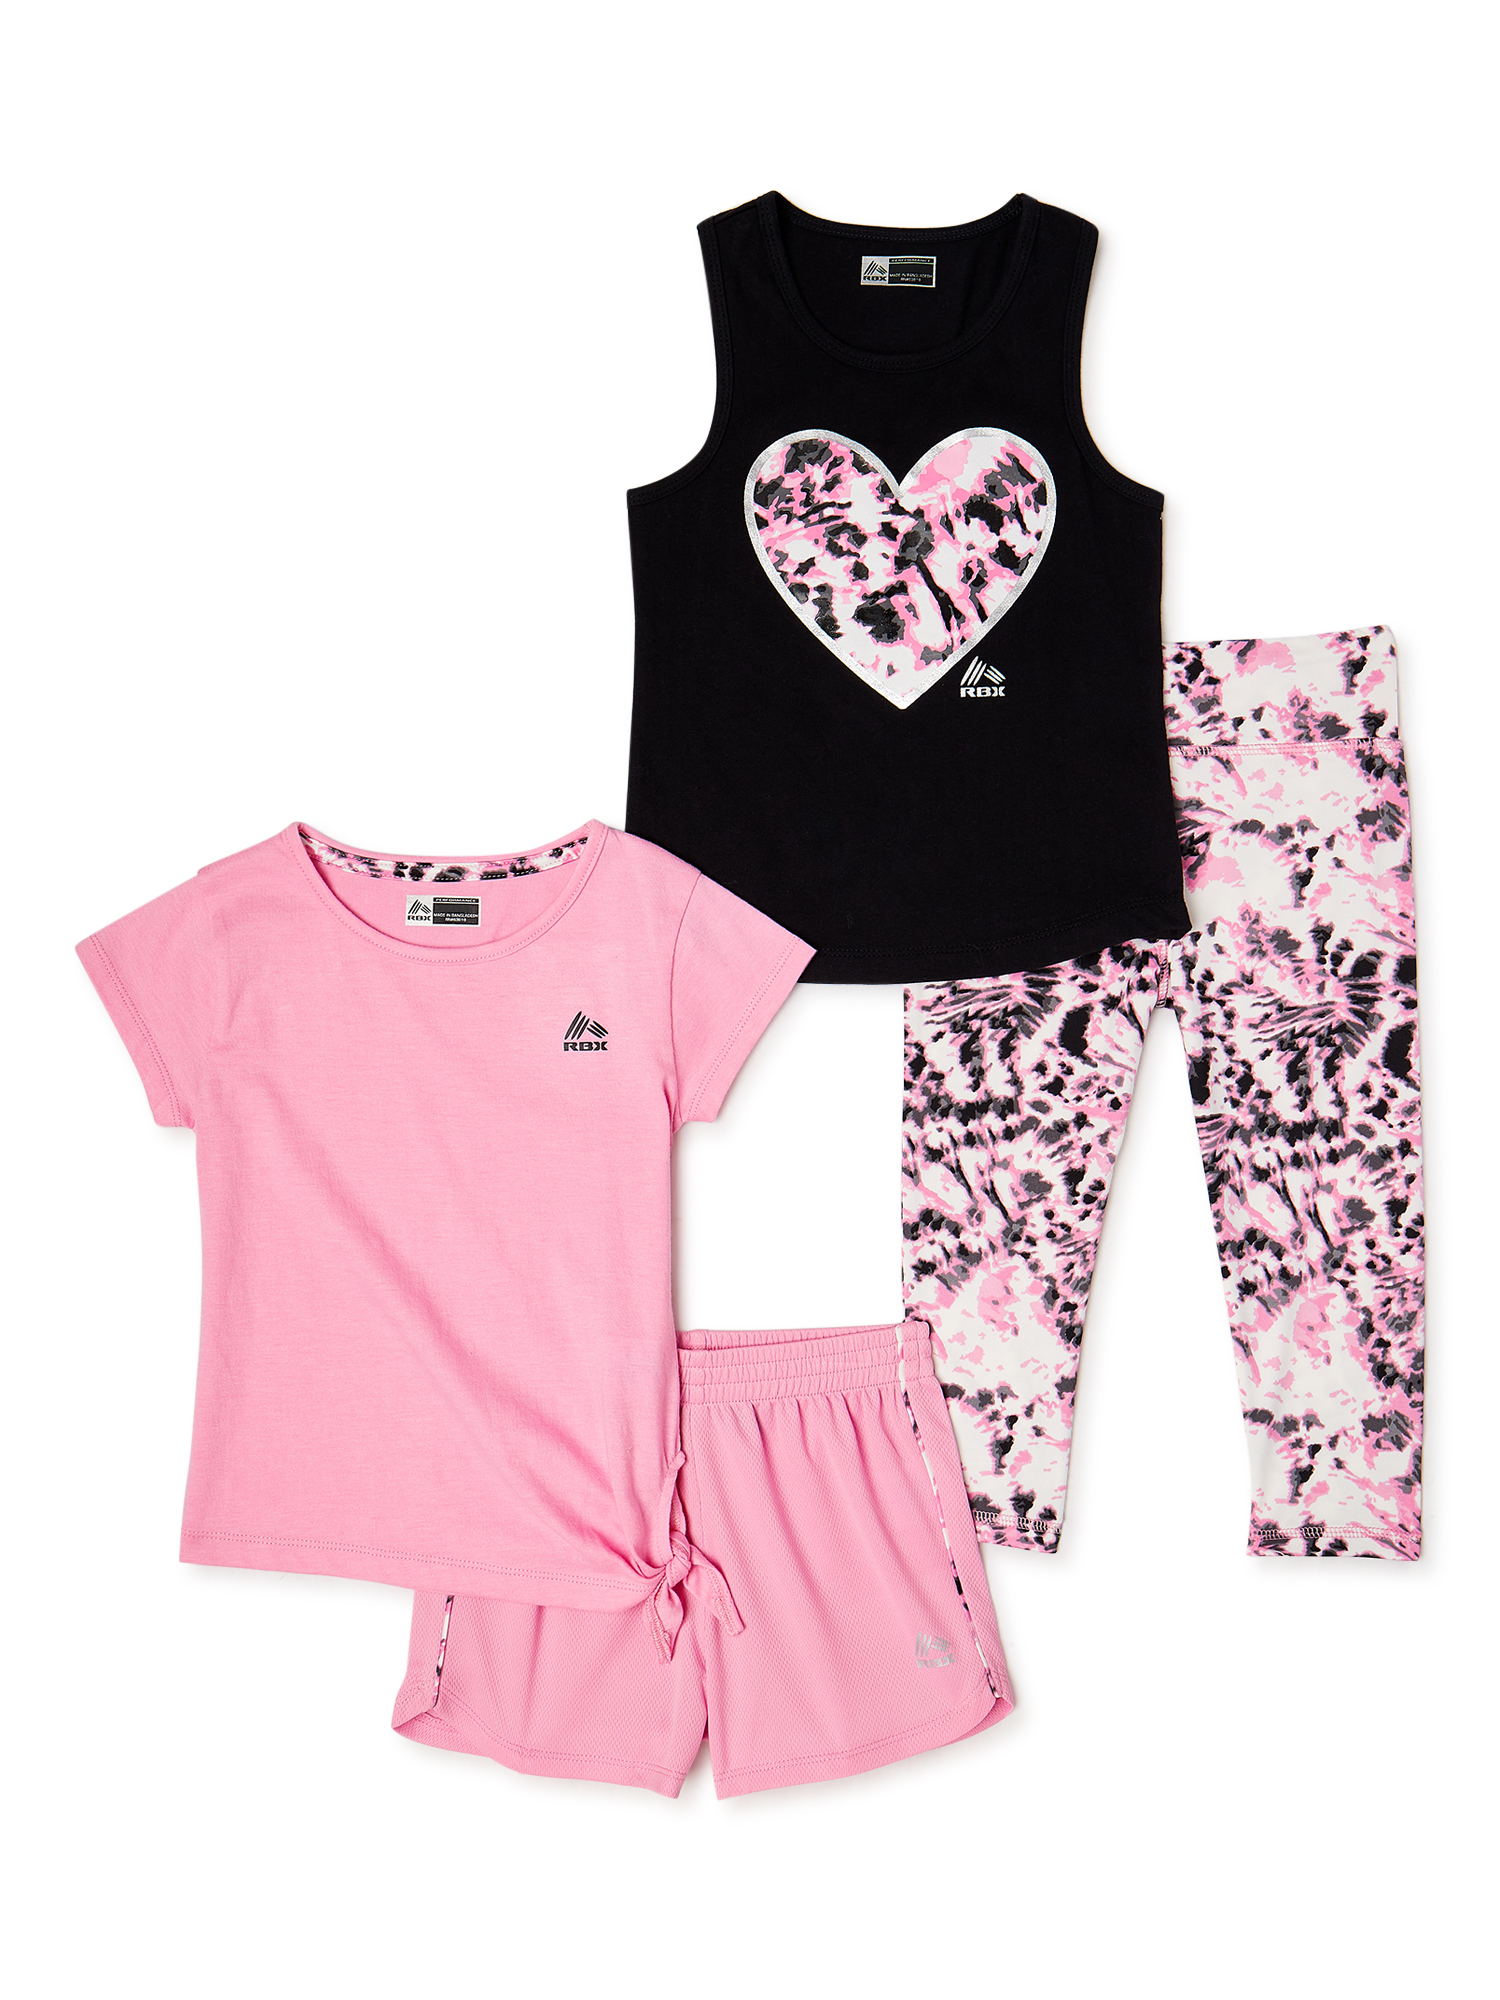 RBX Girls Graphic Tank Top, Performance T-Shirt with Side Tie, Printed Leggings and Running Shorts, 4-Piece Active Set, Sizes 4-16 - image 1 of 3